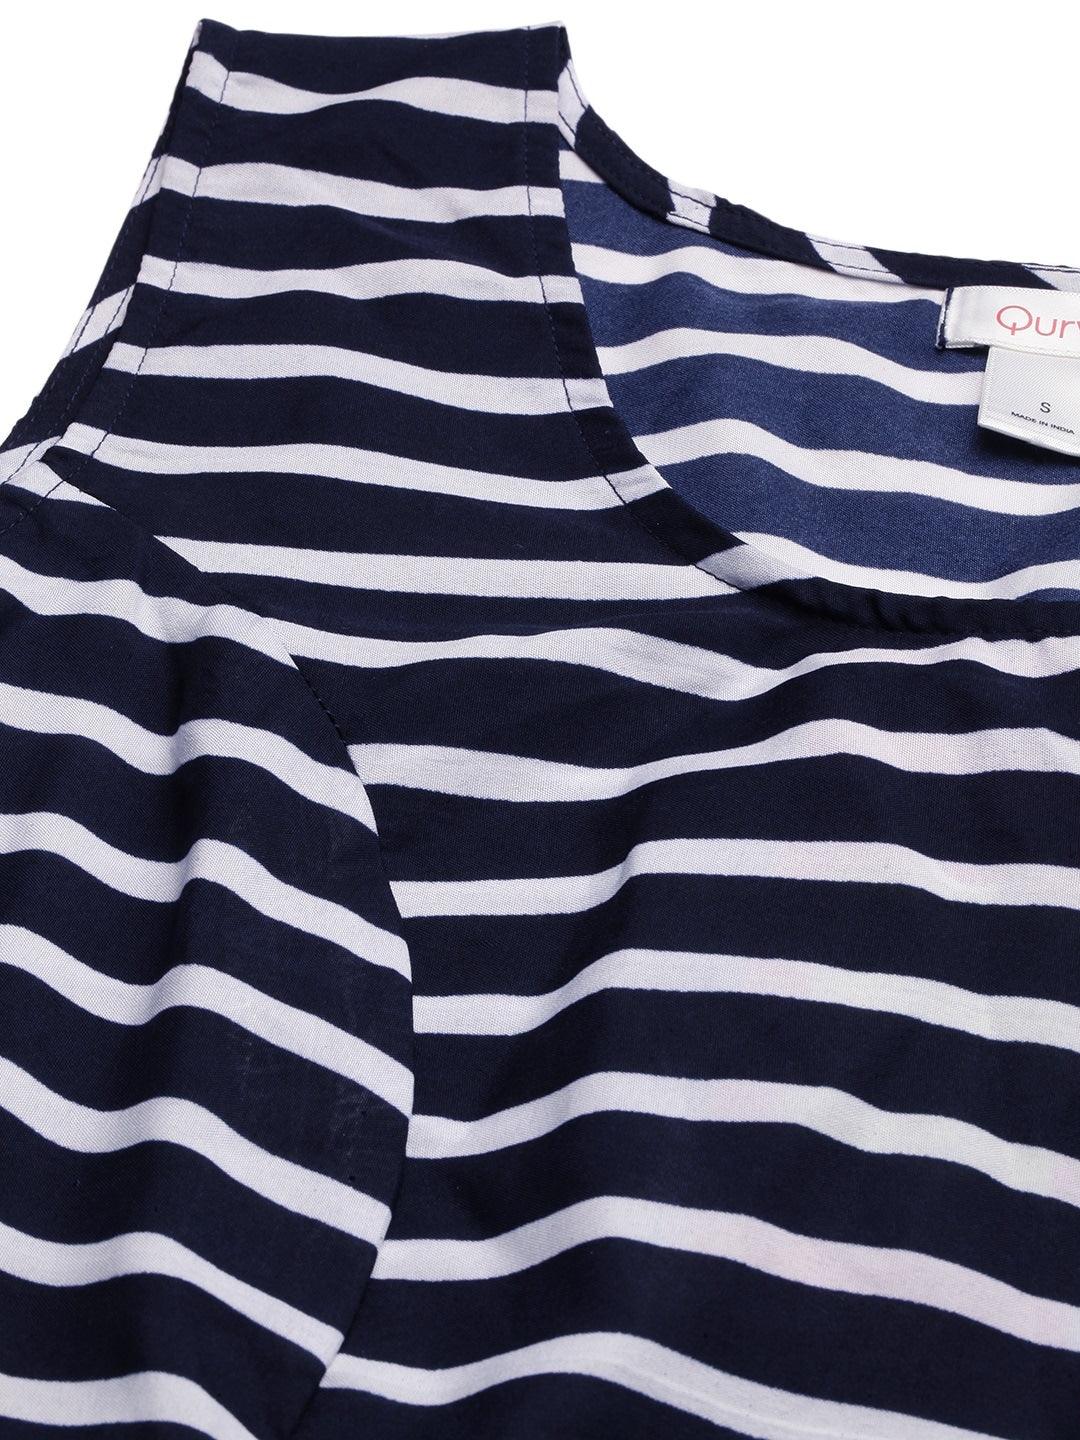 Qurvii Women Navy Blue and White Striped Fit and Flare Dress - Qurvii India